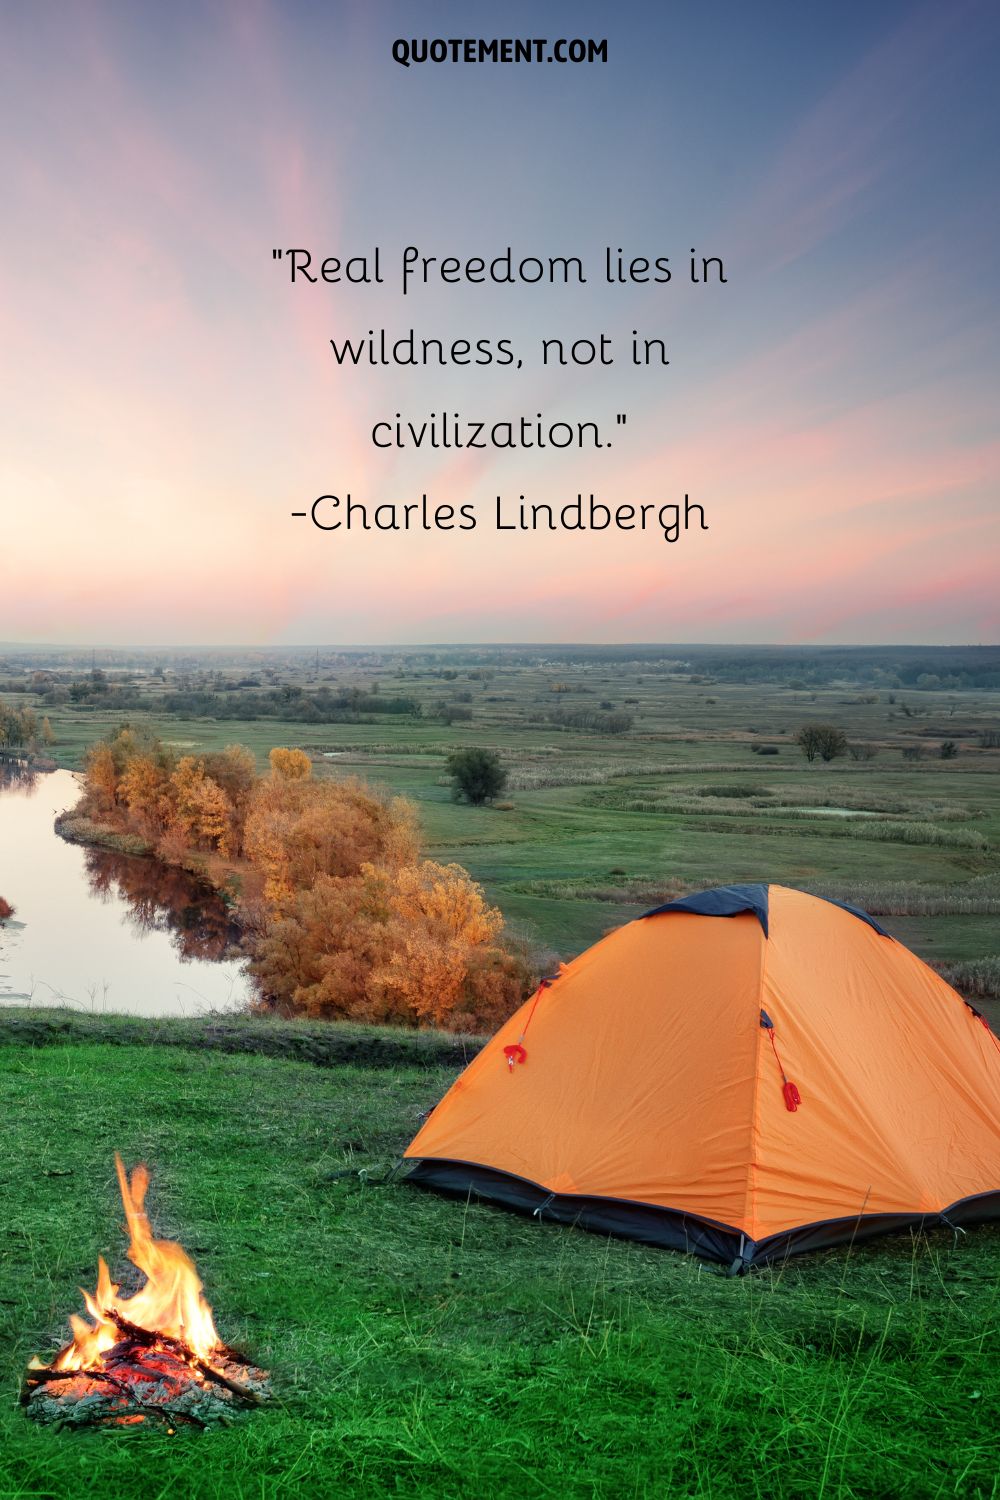 The best camping quote represented by the image of a tent